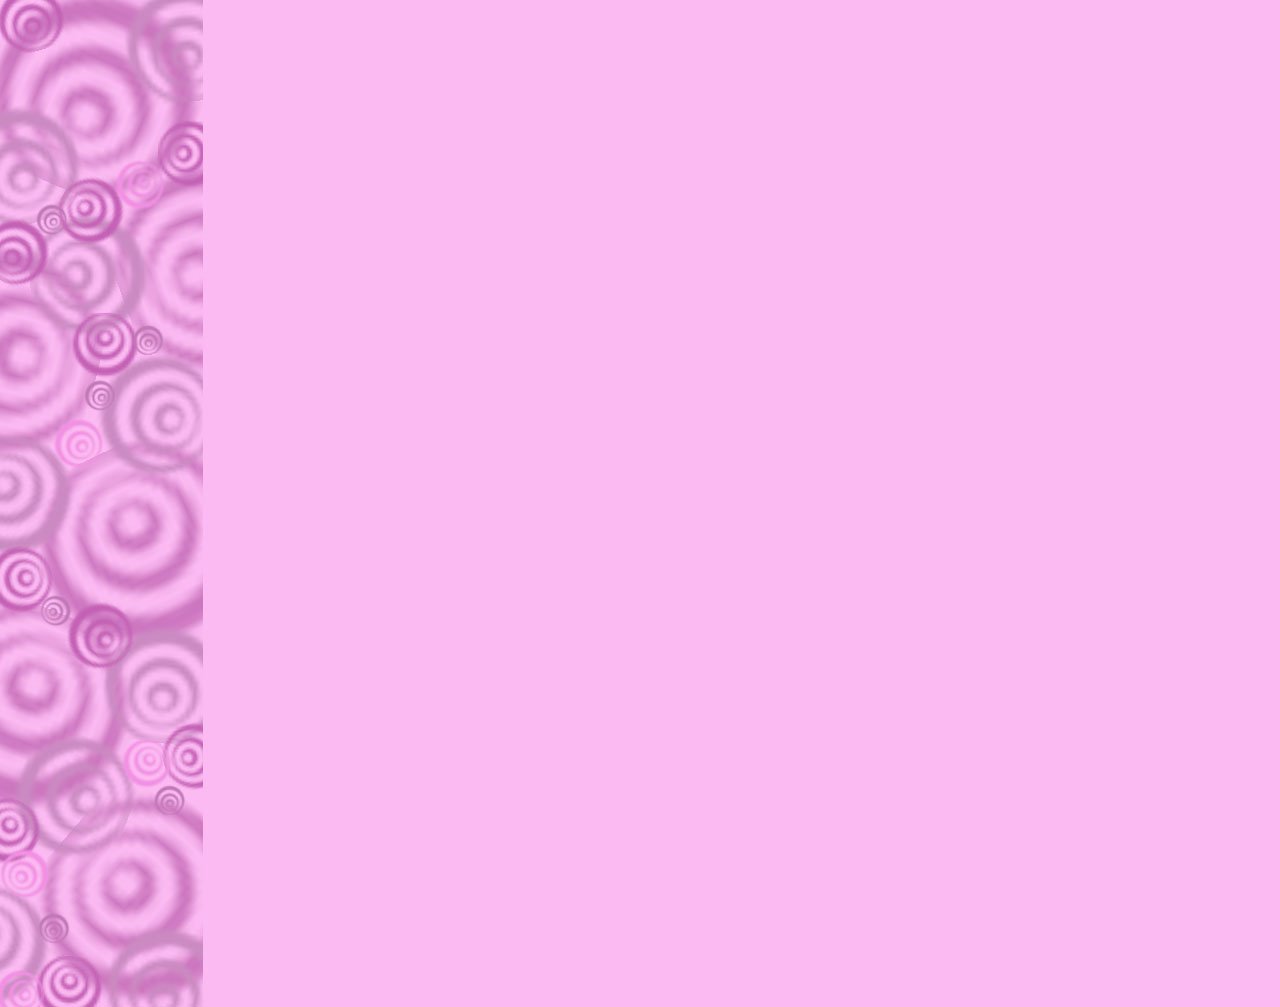 Home Pink and Purple Border